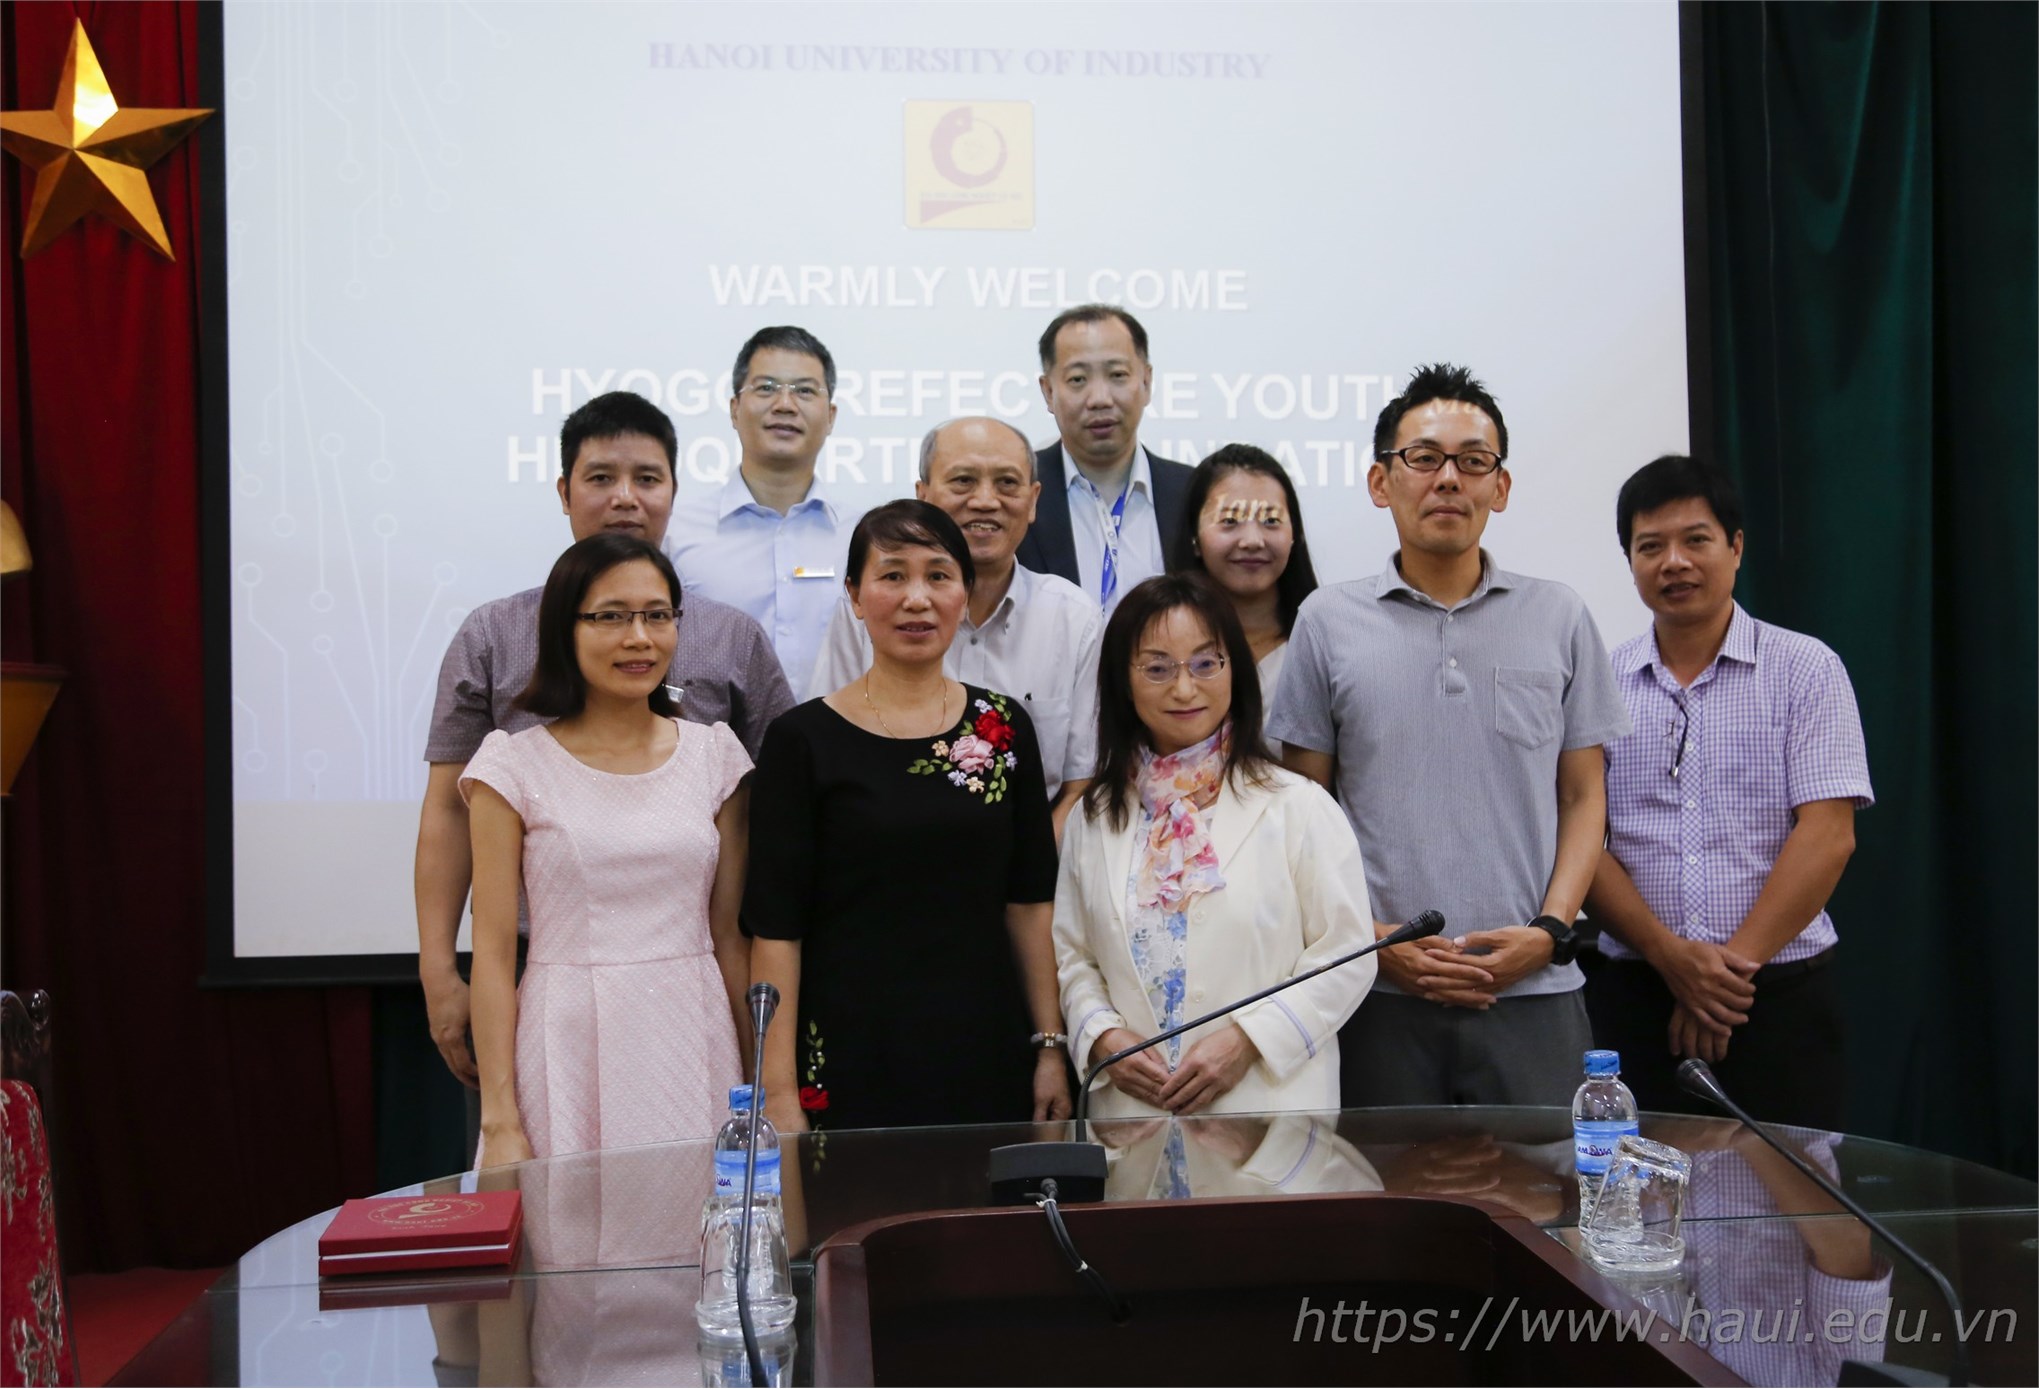 Delegation of Hyogo prefecture, Japan paid a working visit to Hanoi University of Industry